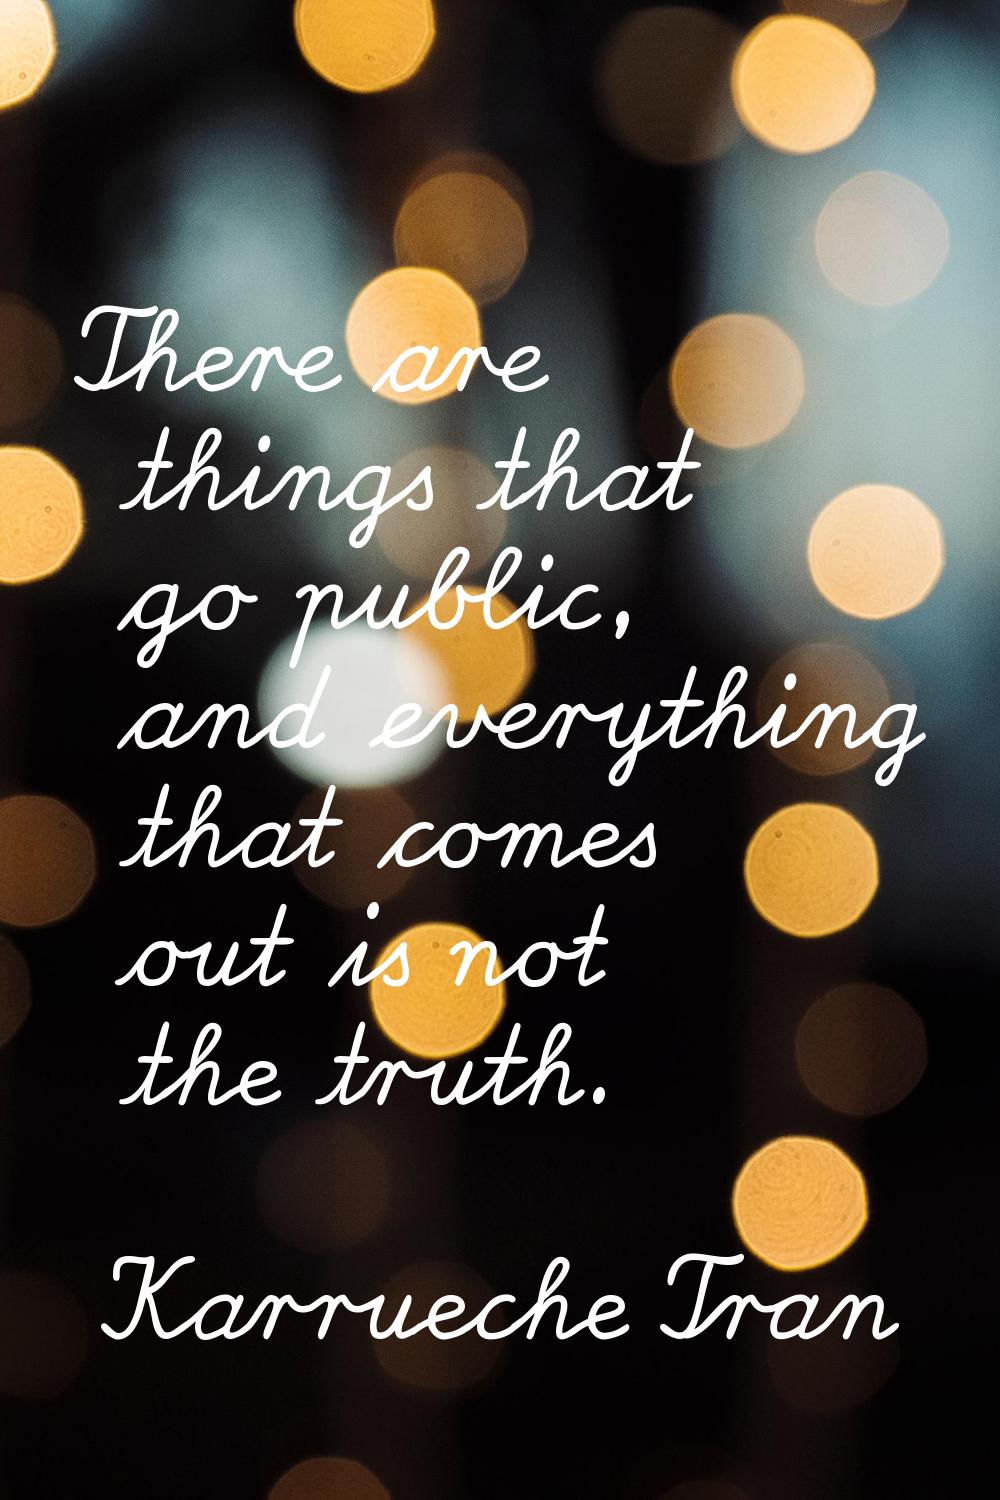 There are things that go public, and everything that comes out is not the truth.